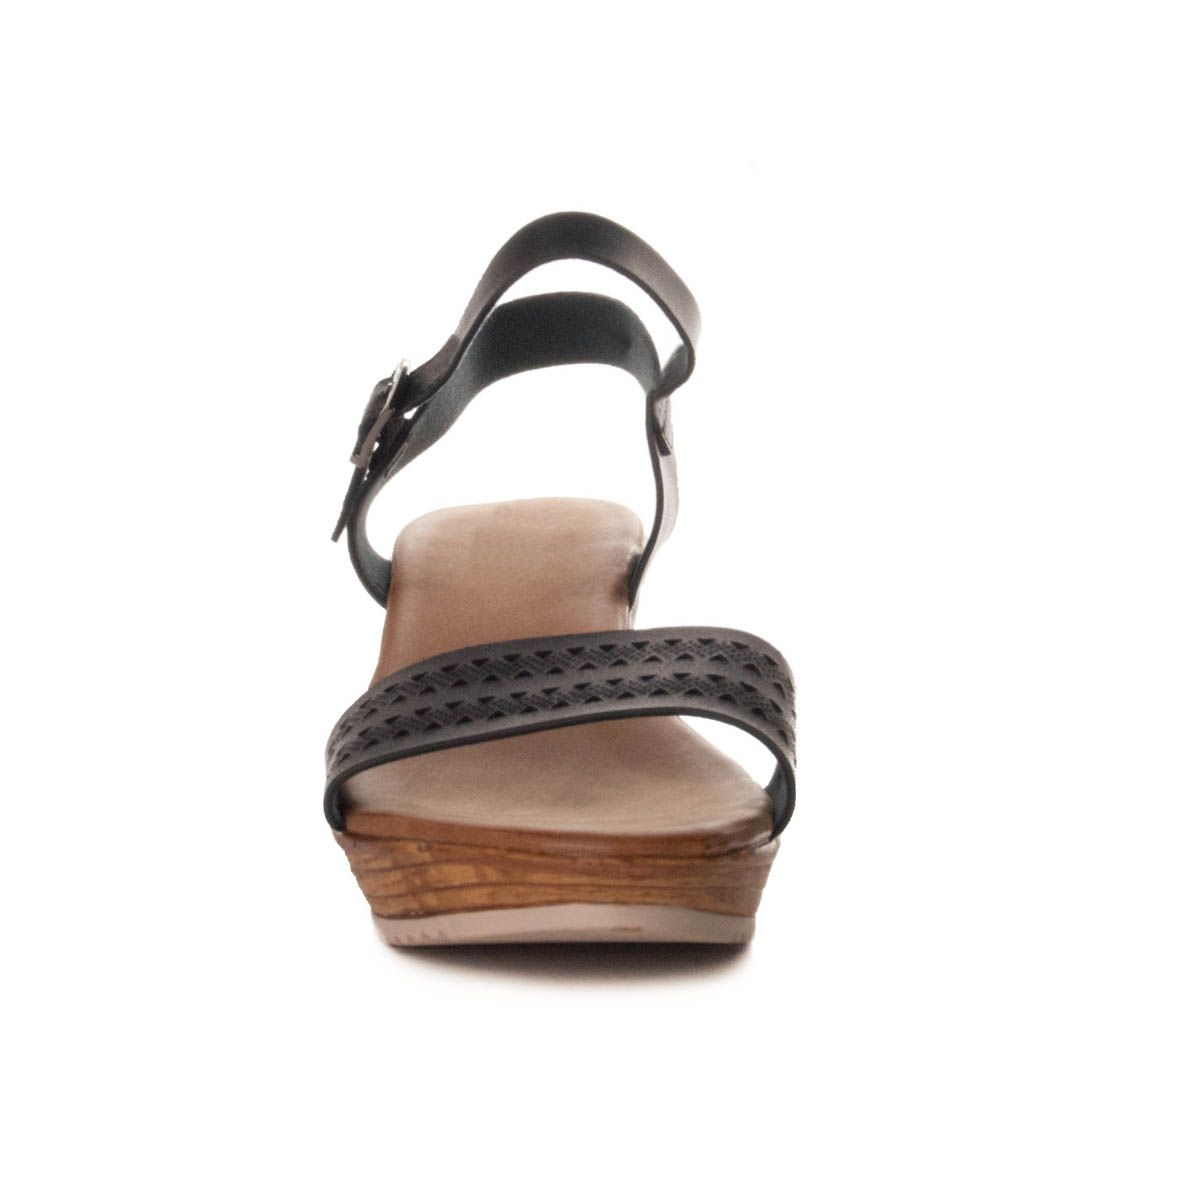 Cork wedge, light what great comfort provides. Of Casual And Original Style. Esparto sole. Very comfortable.